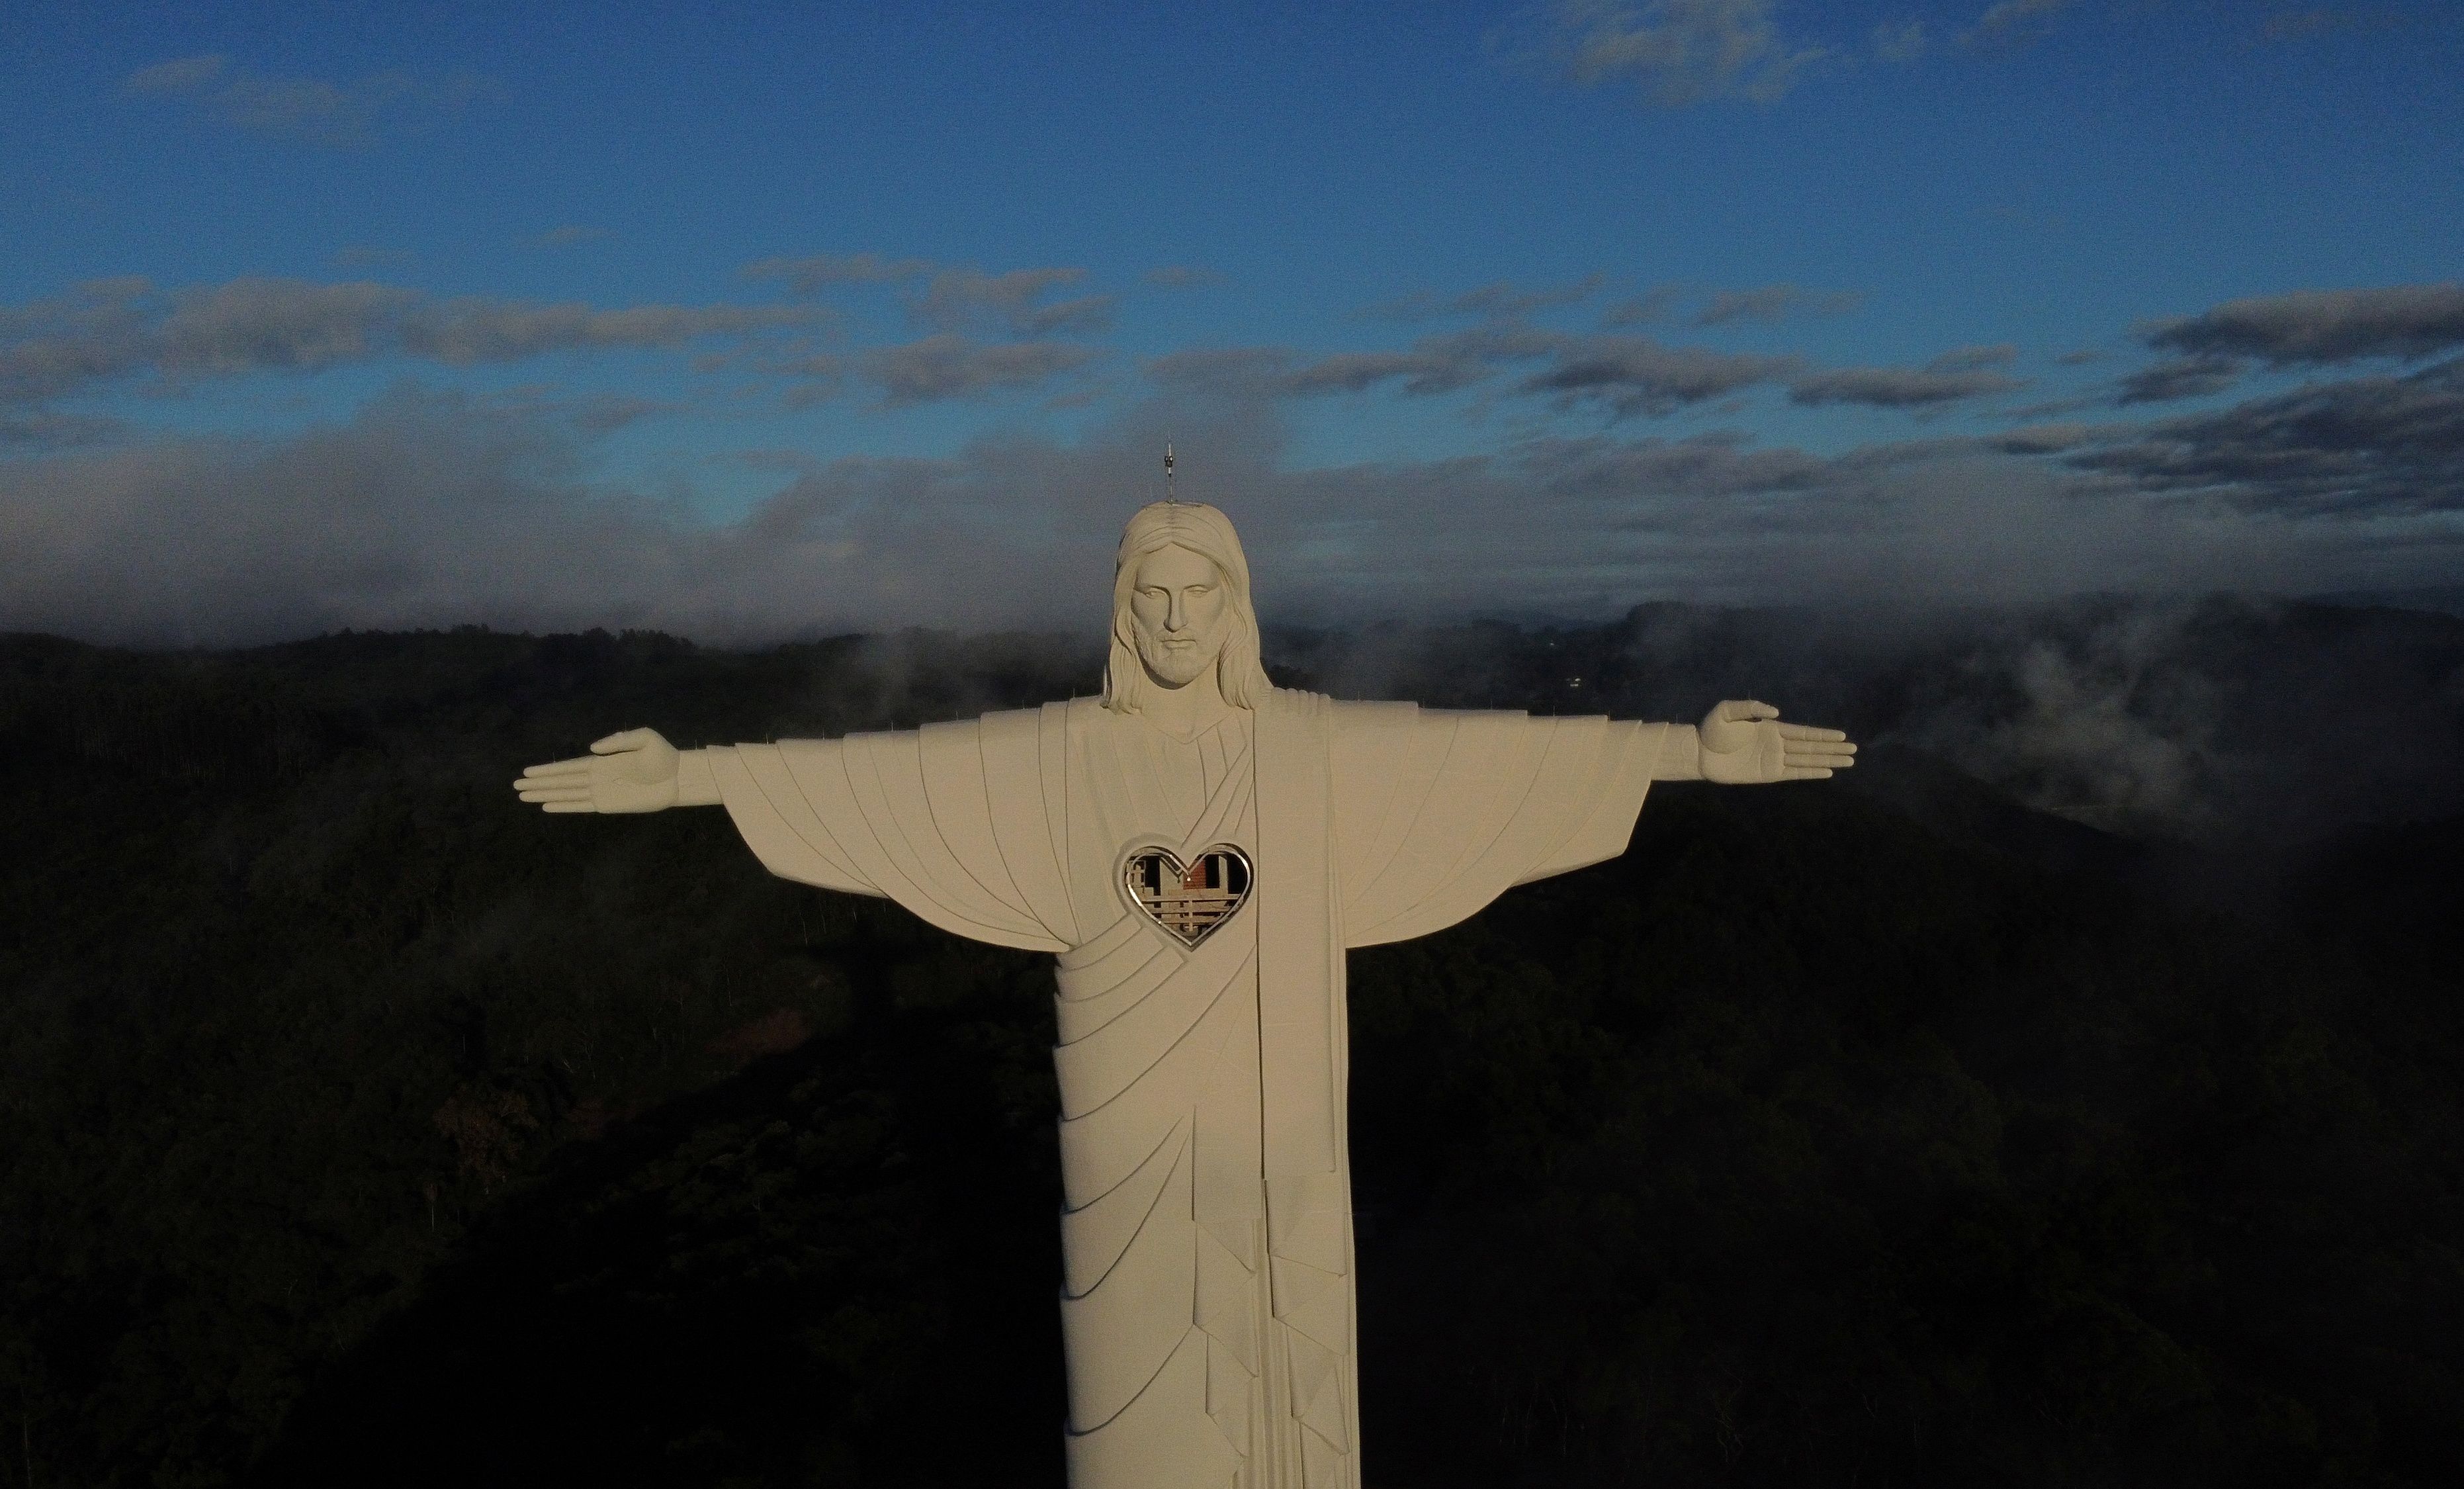 Brazil has a towering new statue of Jesus | CNN